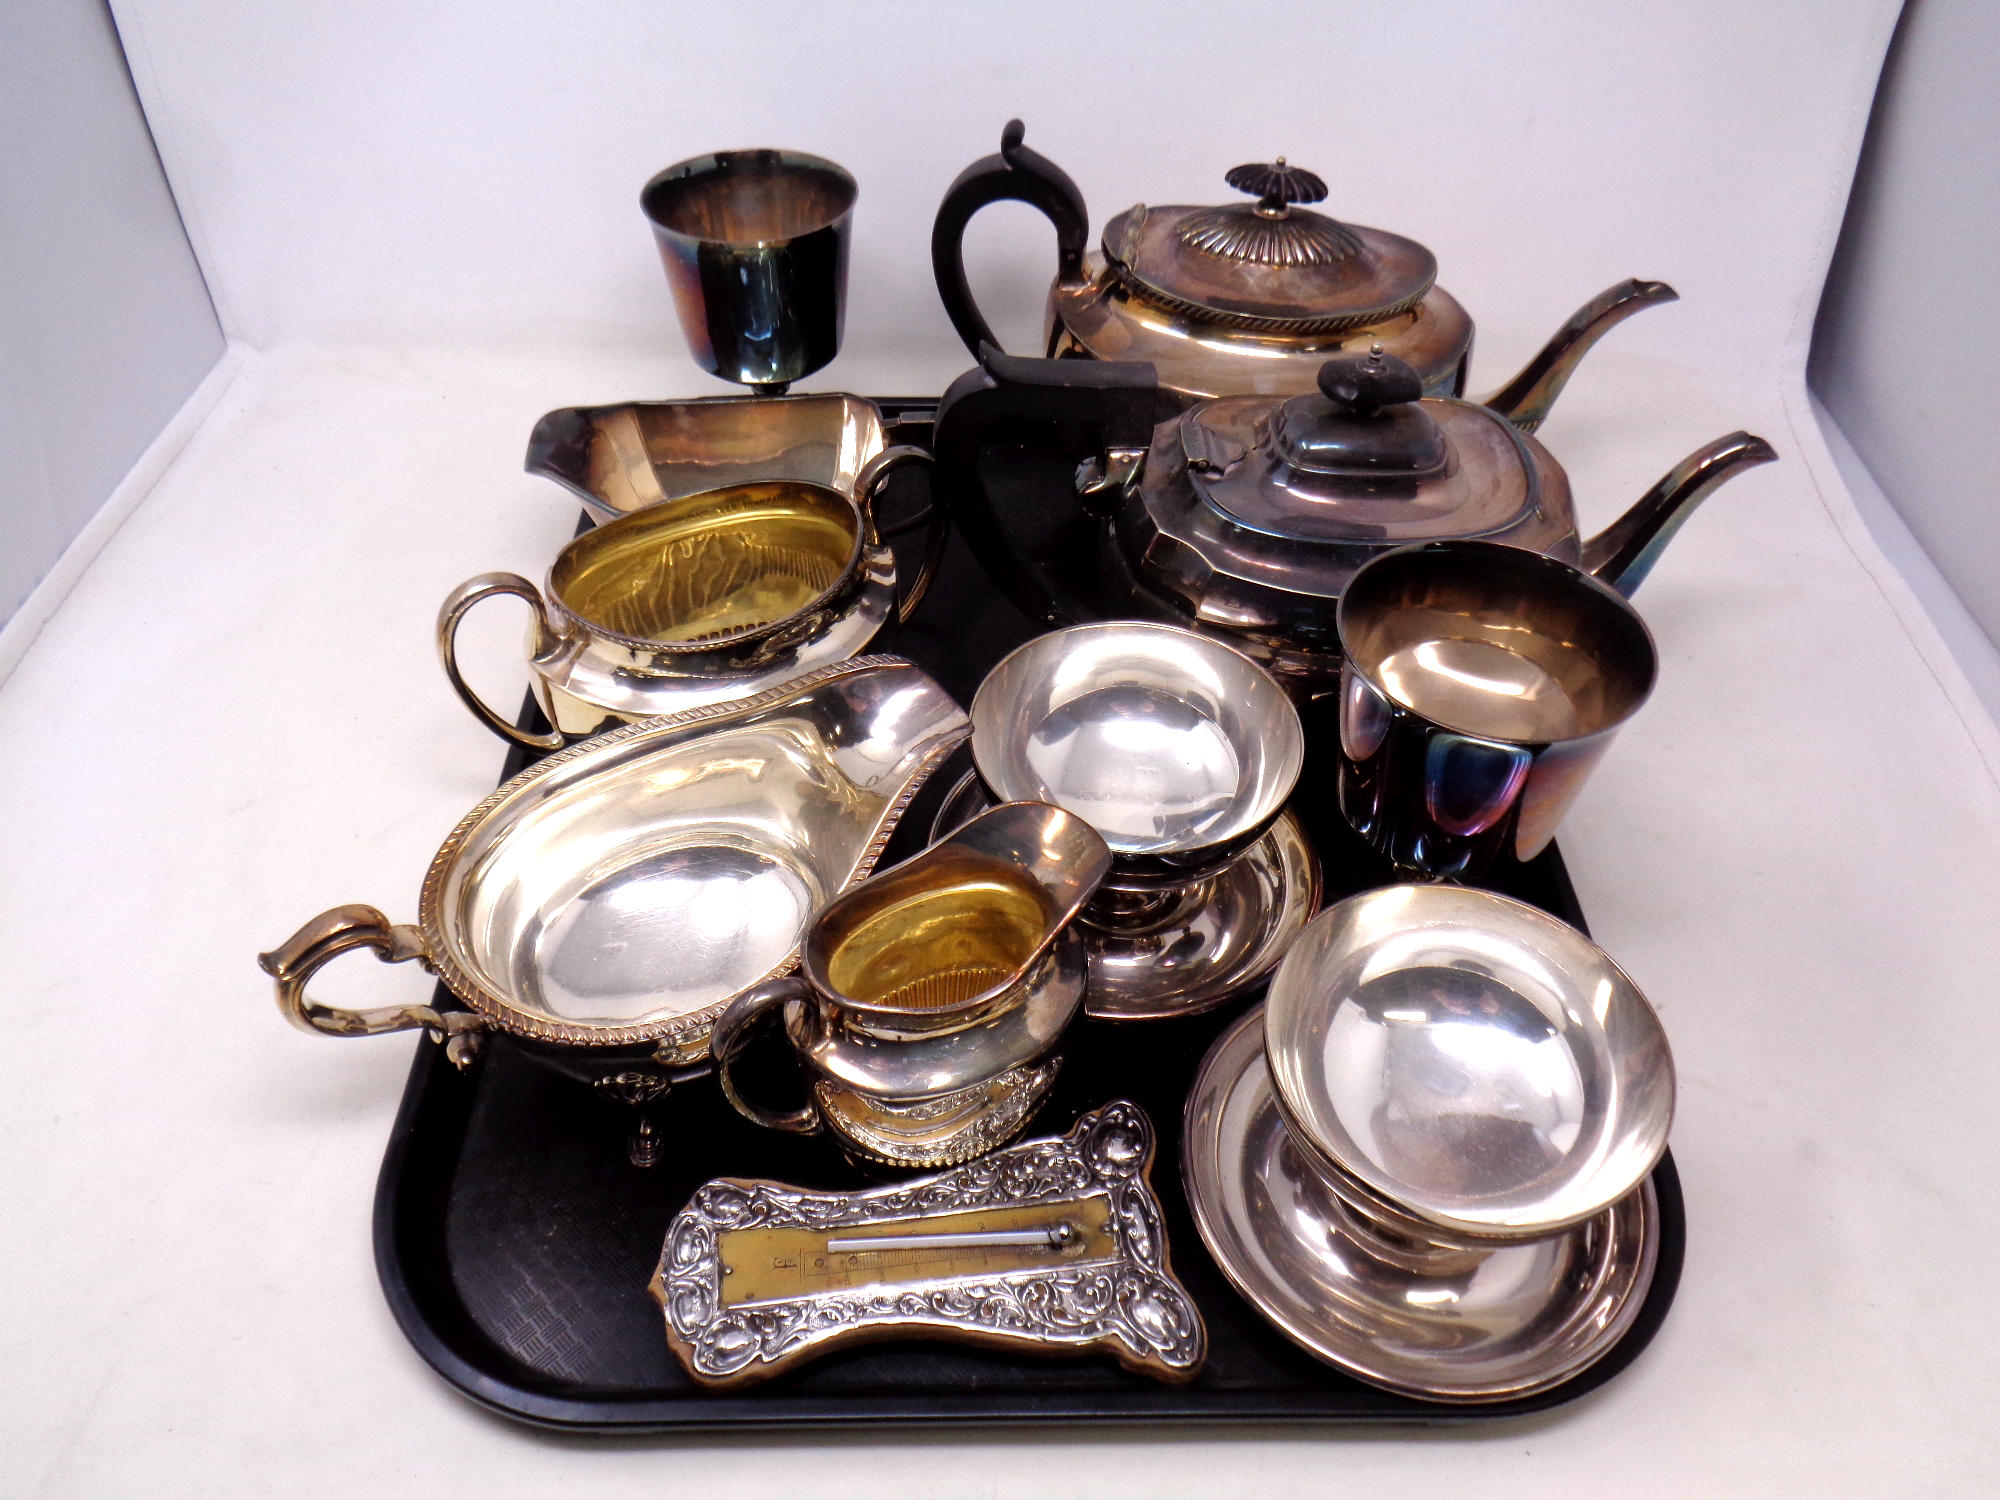 A tray of silver plated part tea set, gravy boat,